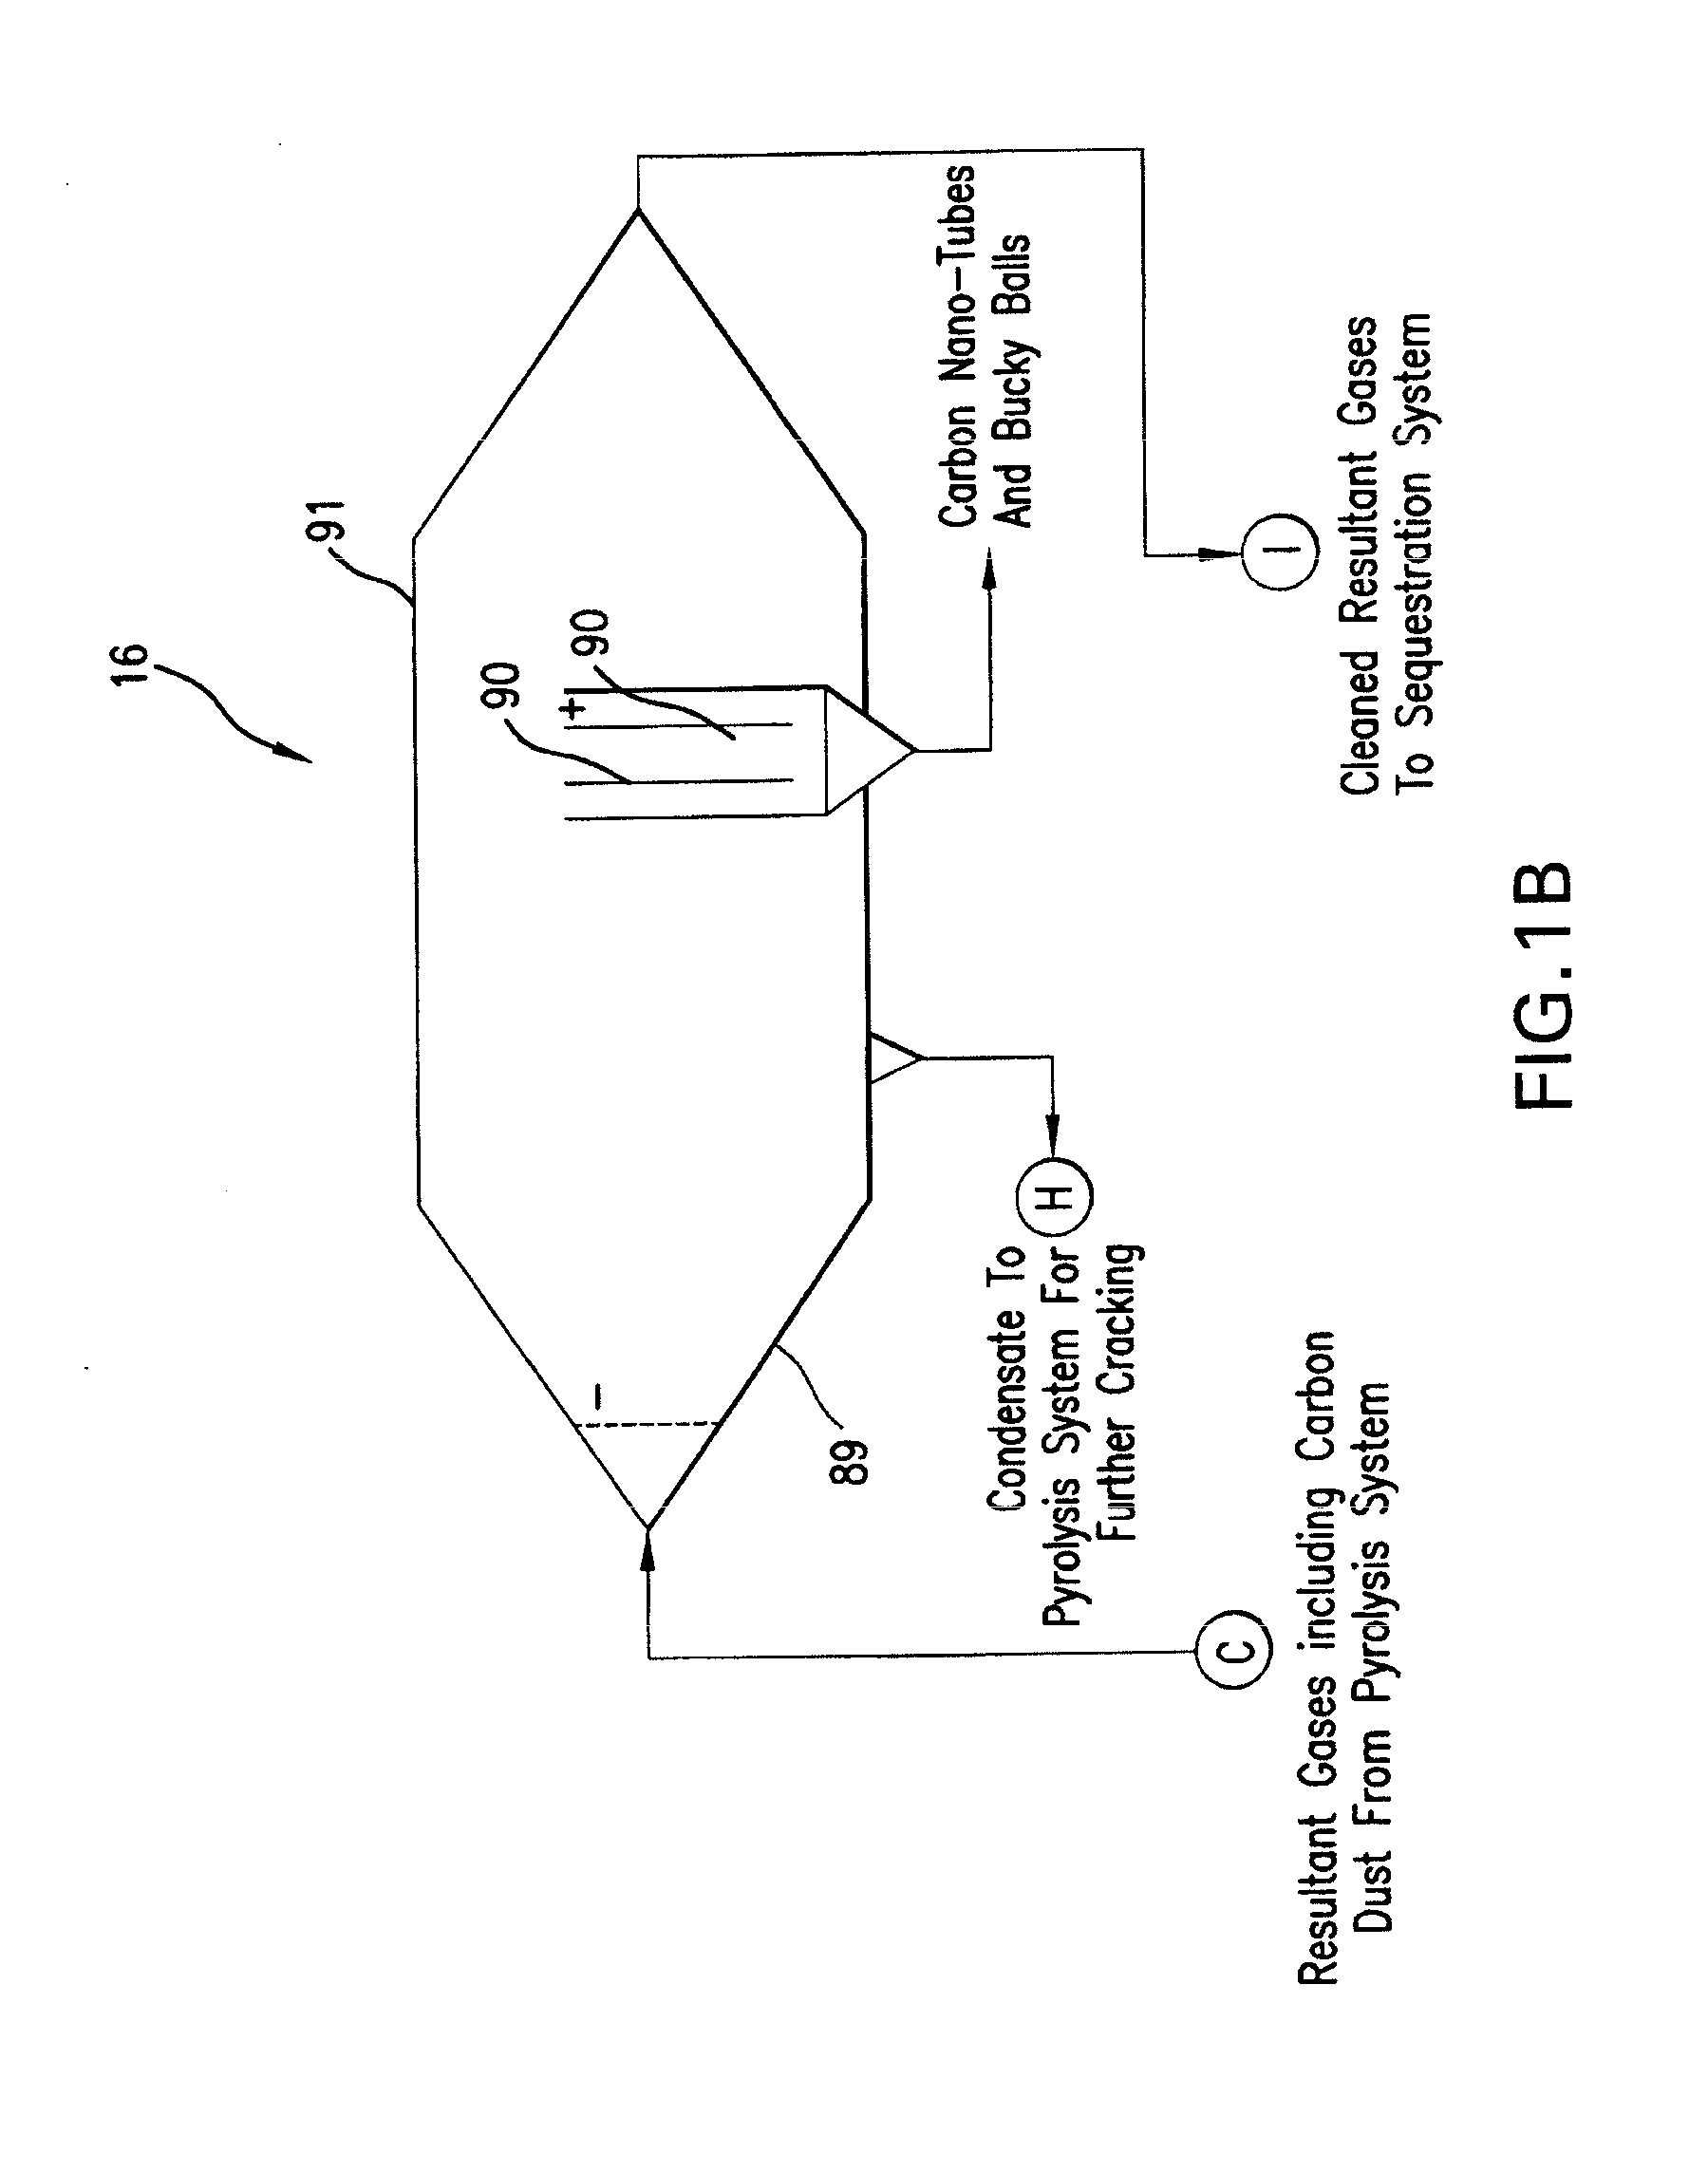 Pyrolysis systems, methods, and resultants derived therefrom